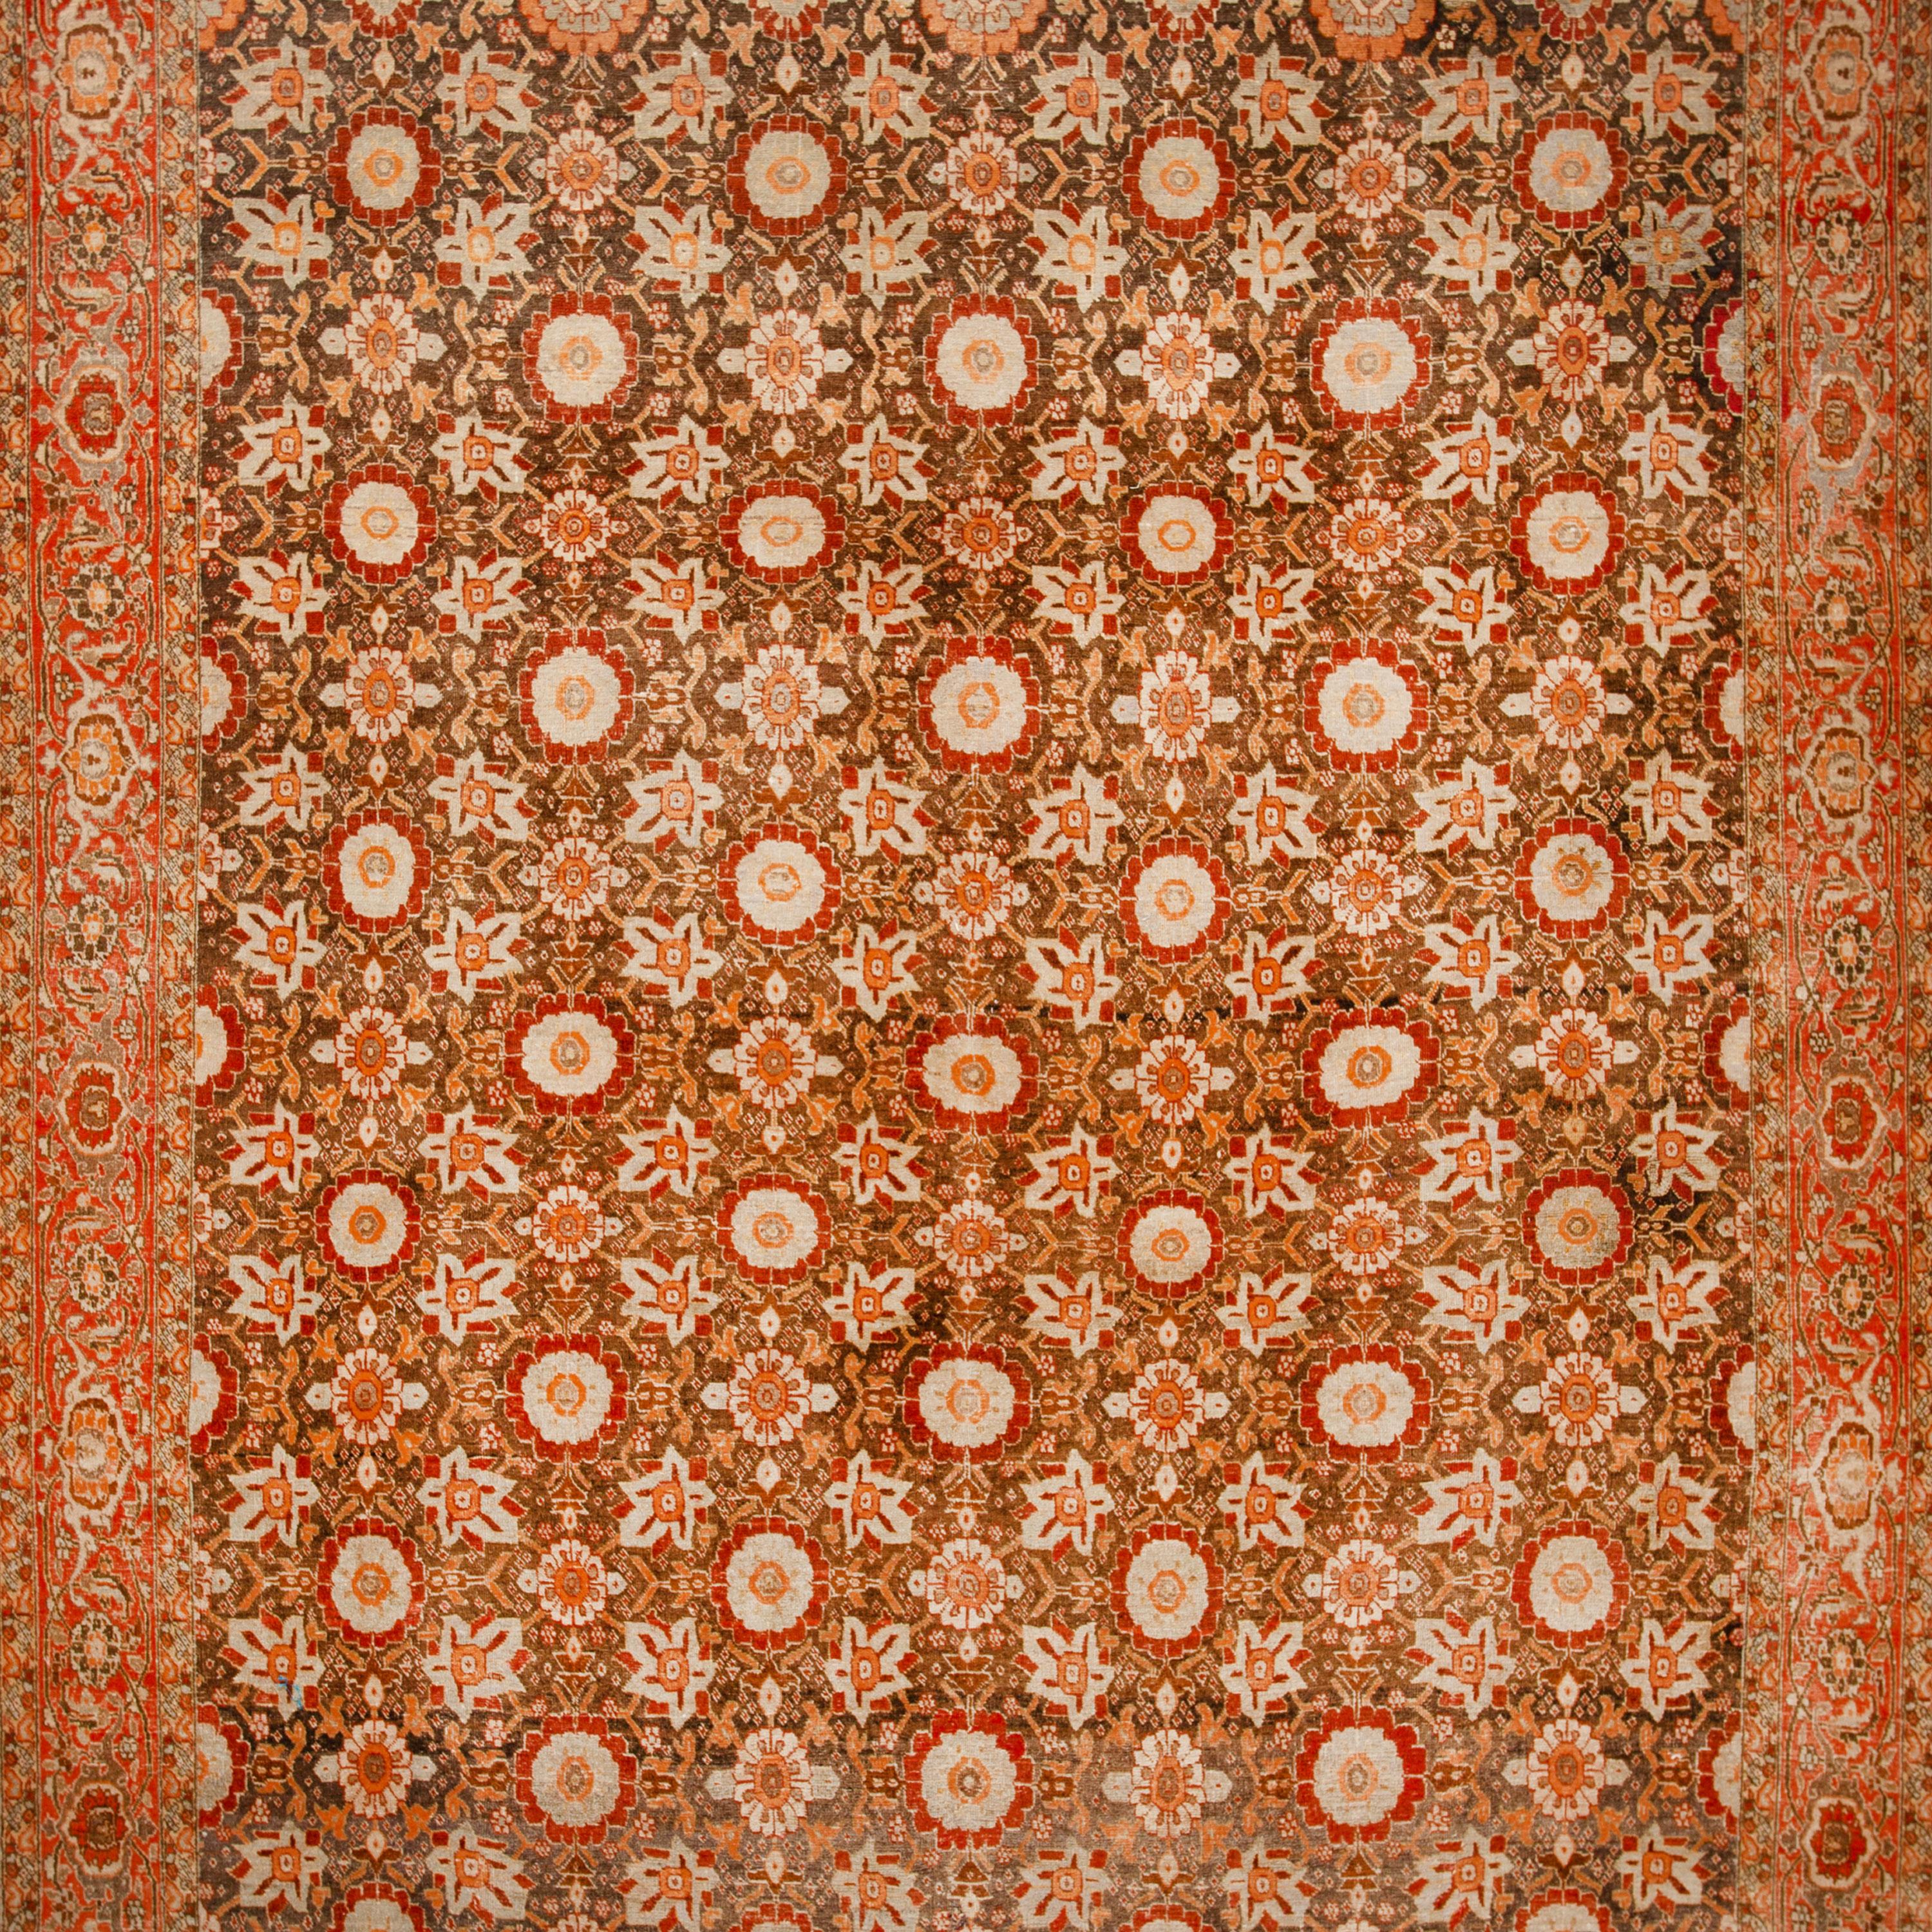 A rich earth-toned color palette and traditional motifs make this Brown Vintage Wool Malaya Persian Rug - 9'5